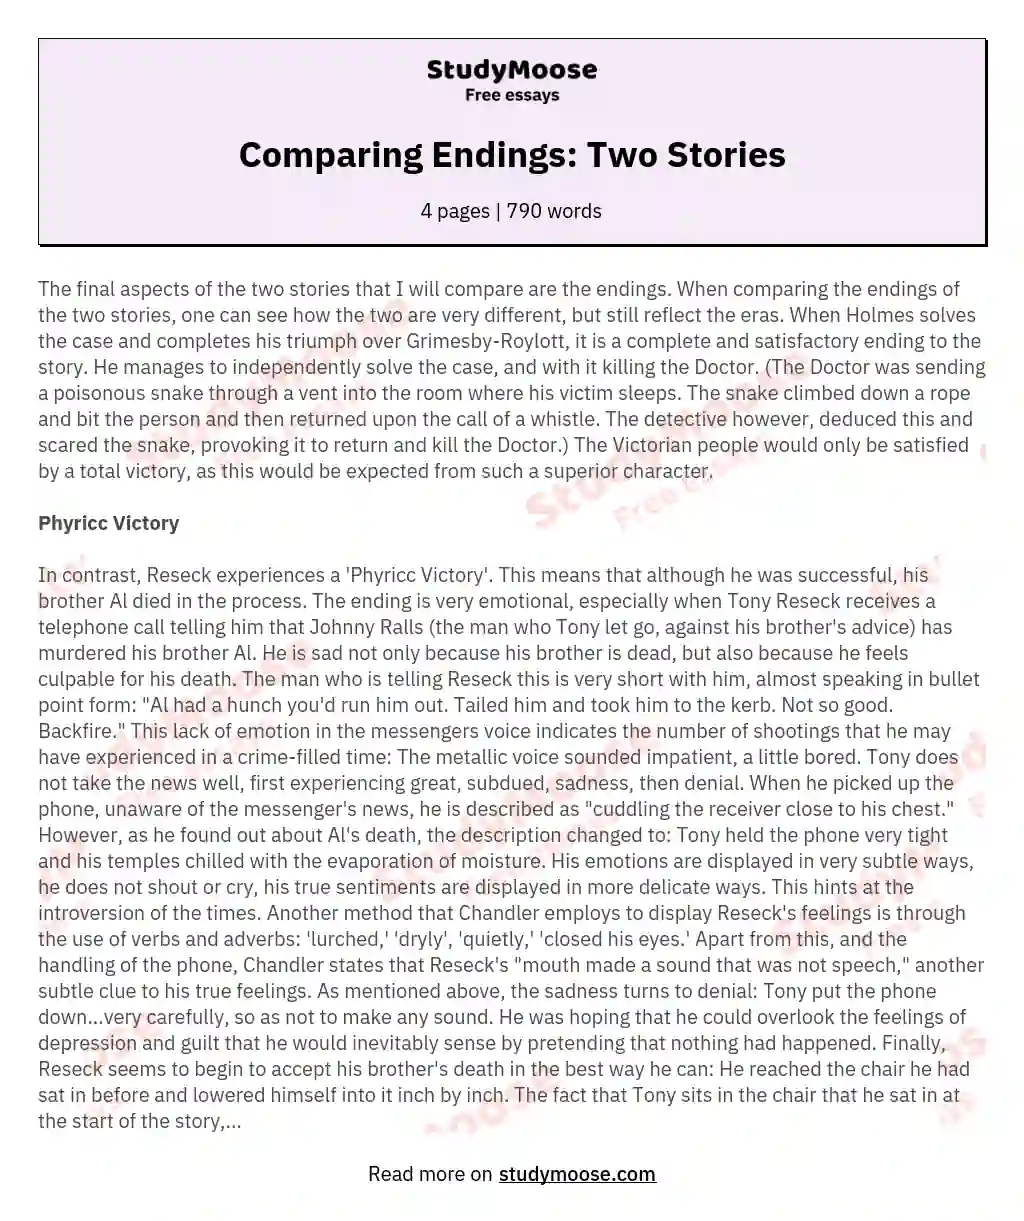 Comparing Endings: Two Stories essay